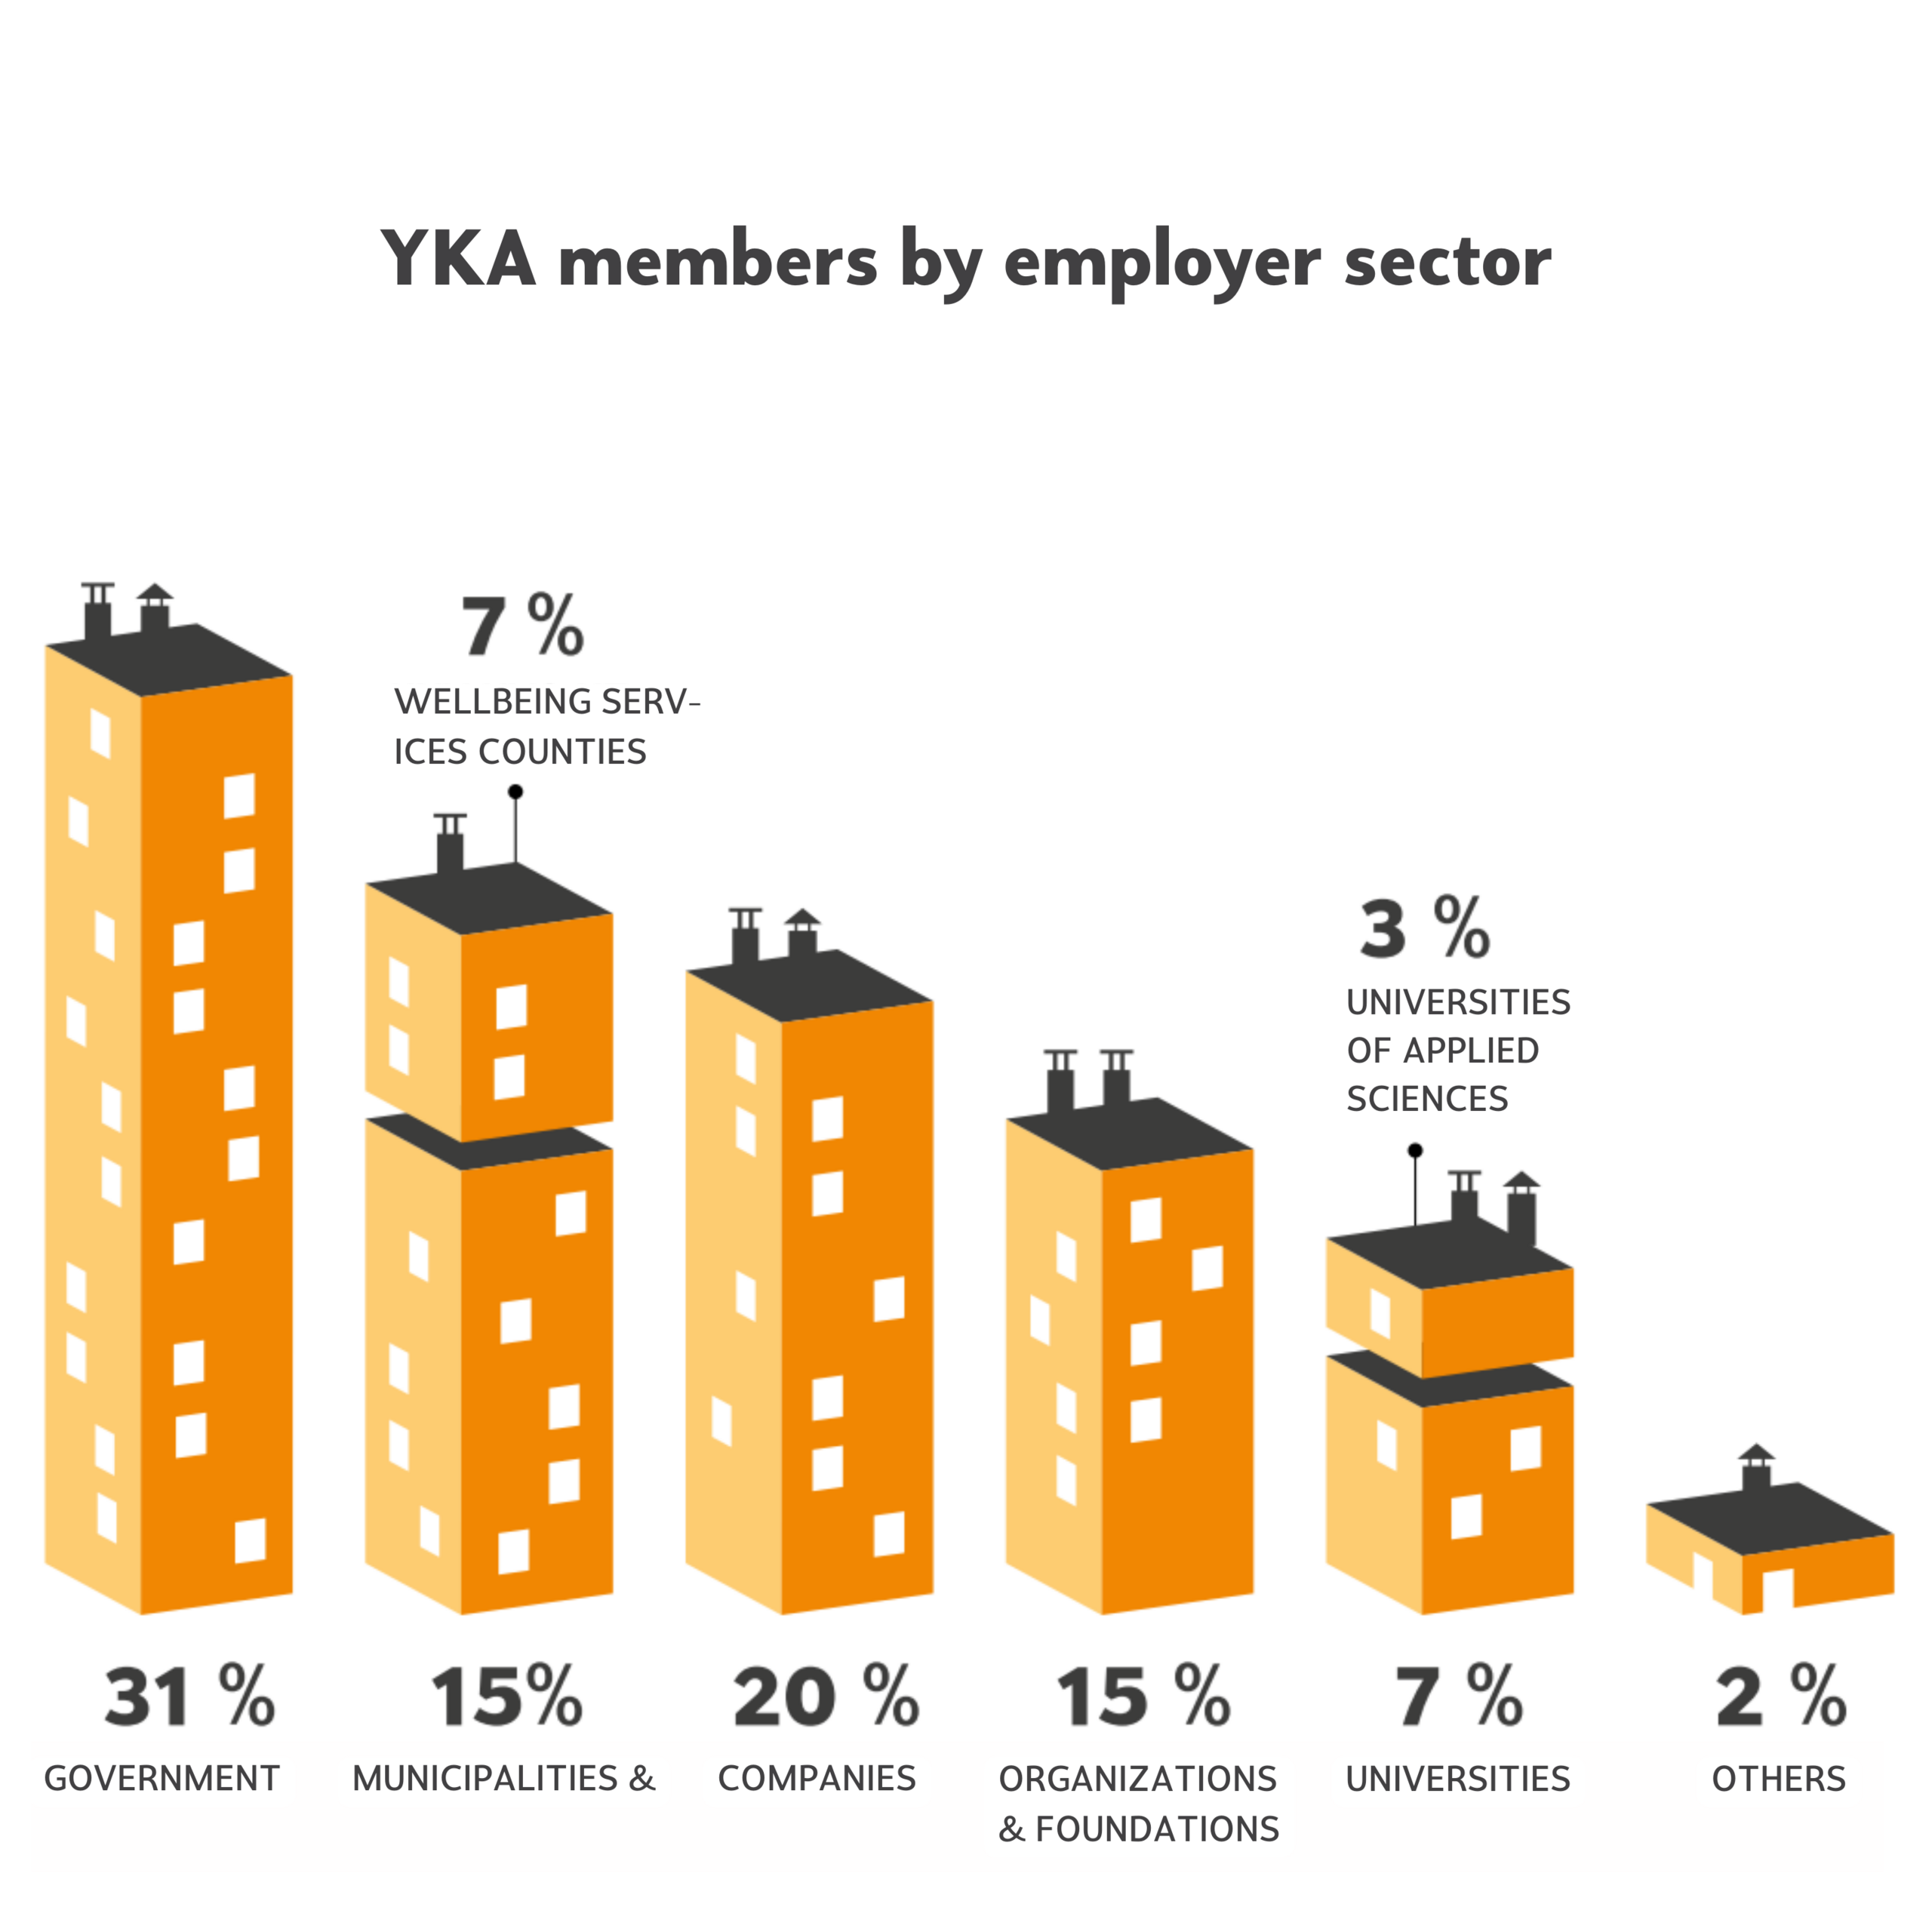 Illustration: YKA members by employer sector